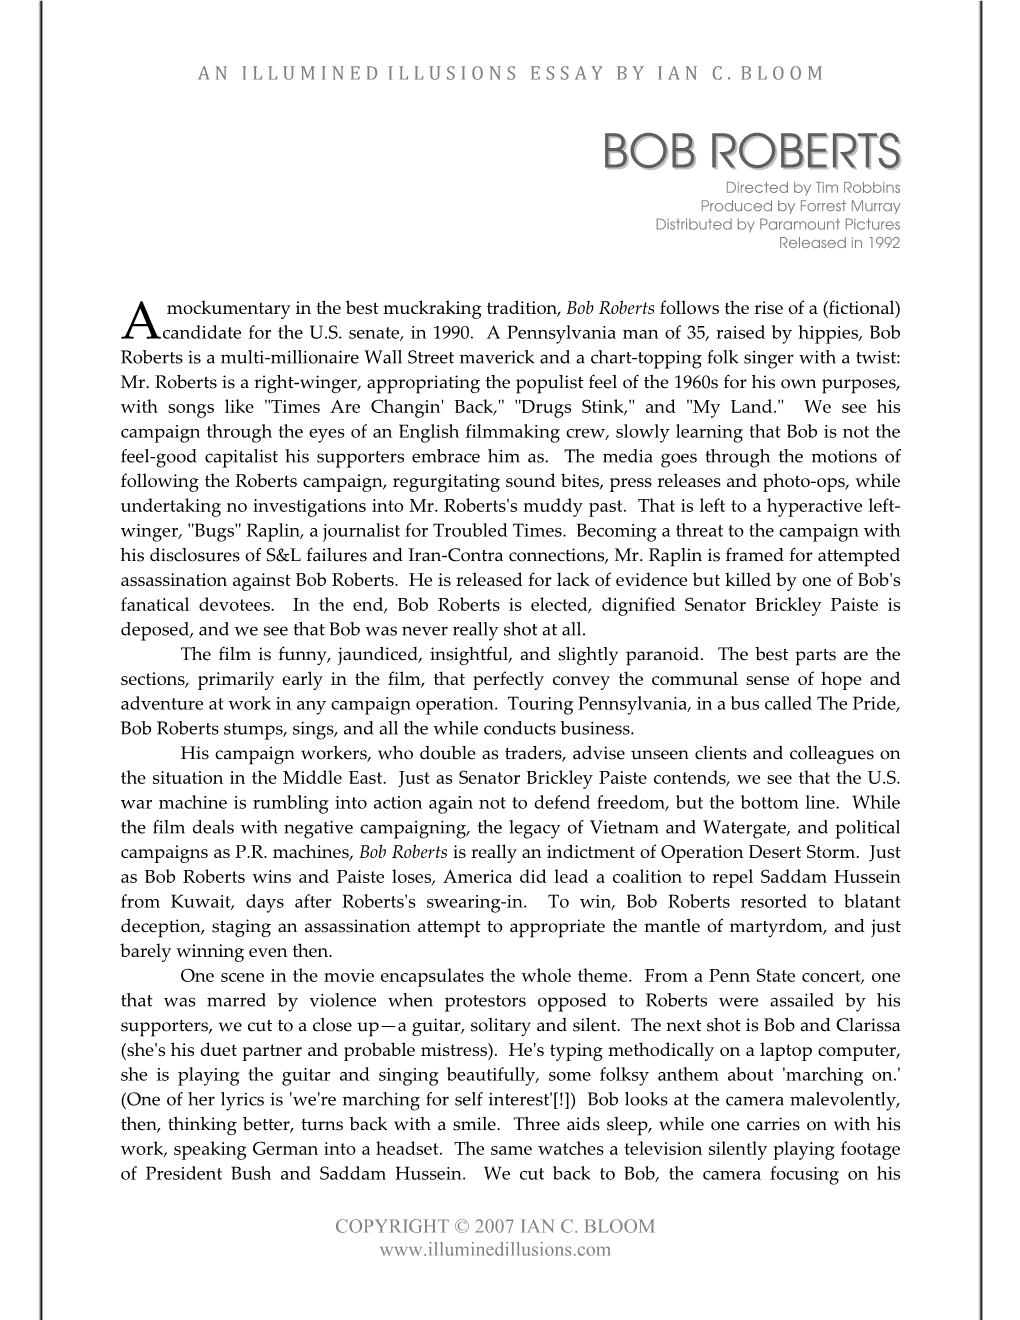 Bob Roberts Follows the Rise of a (Fictional) a Candidate for the U.S